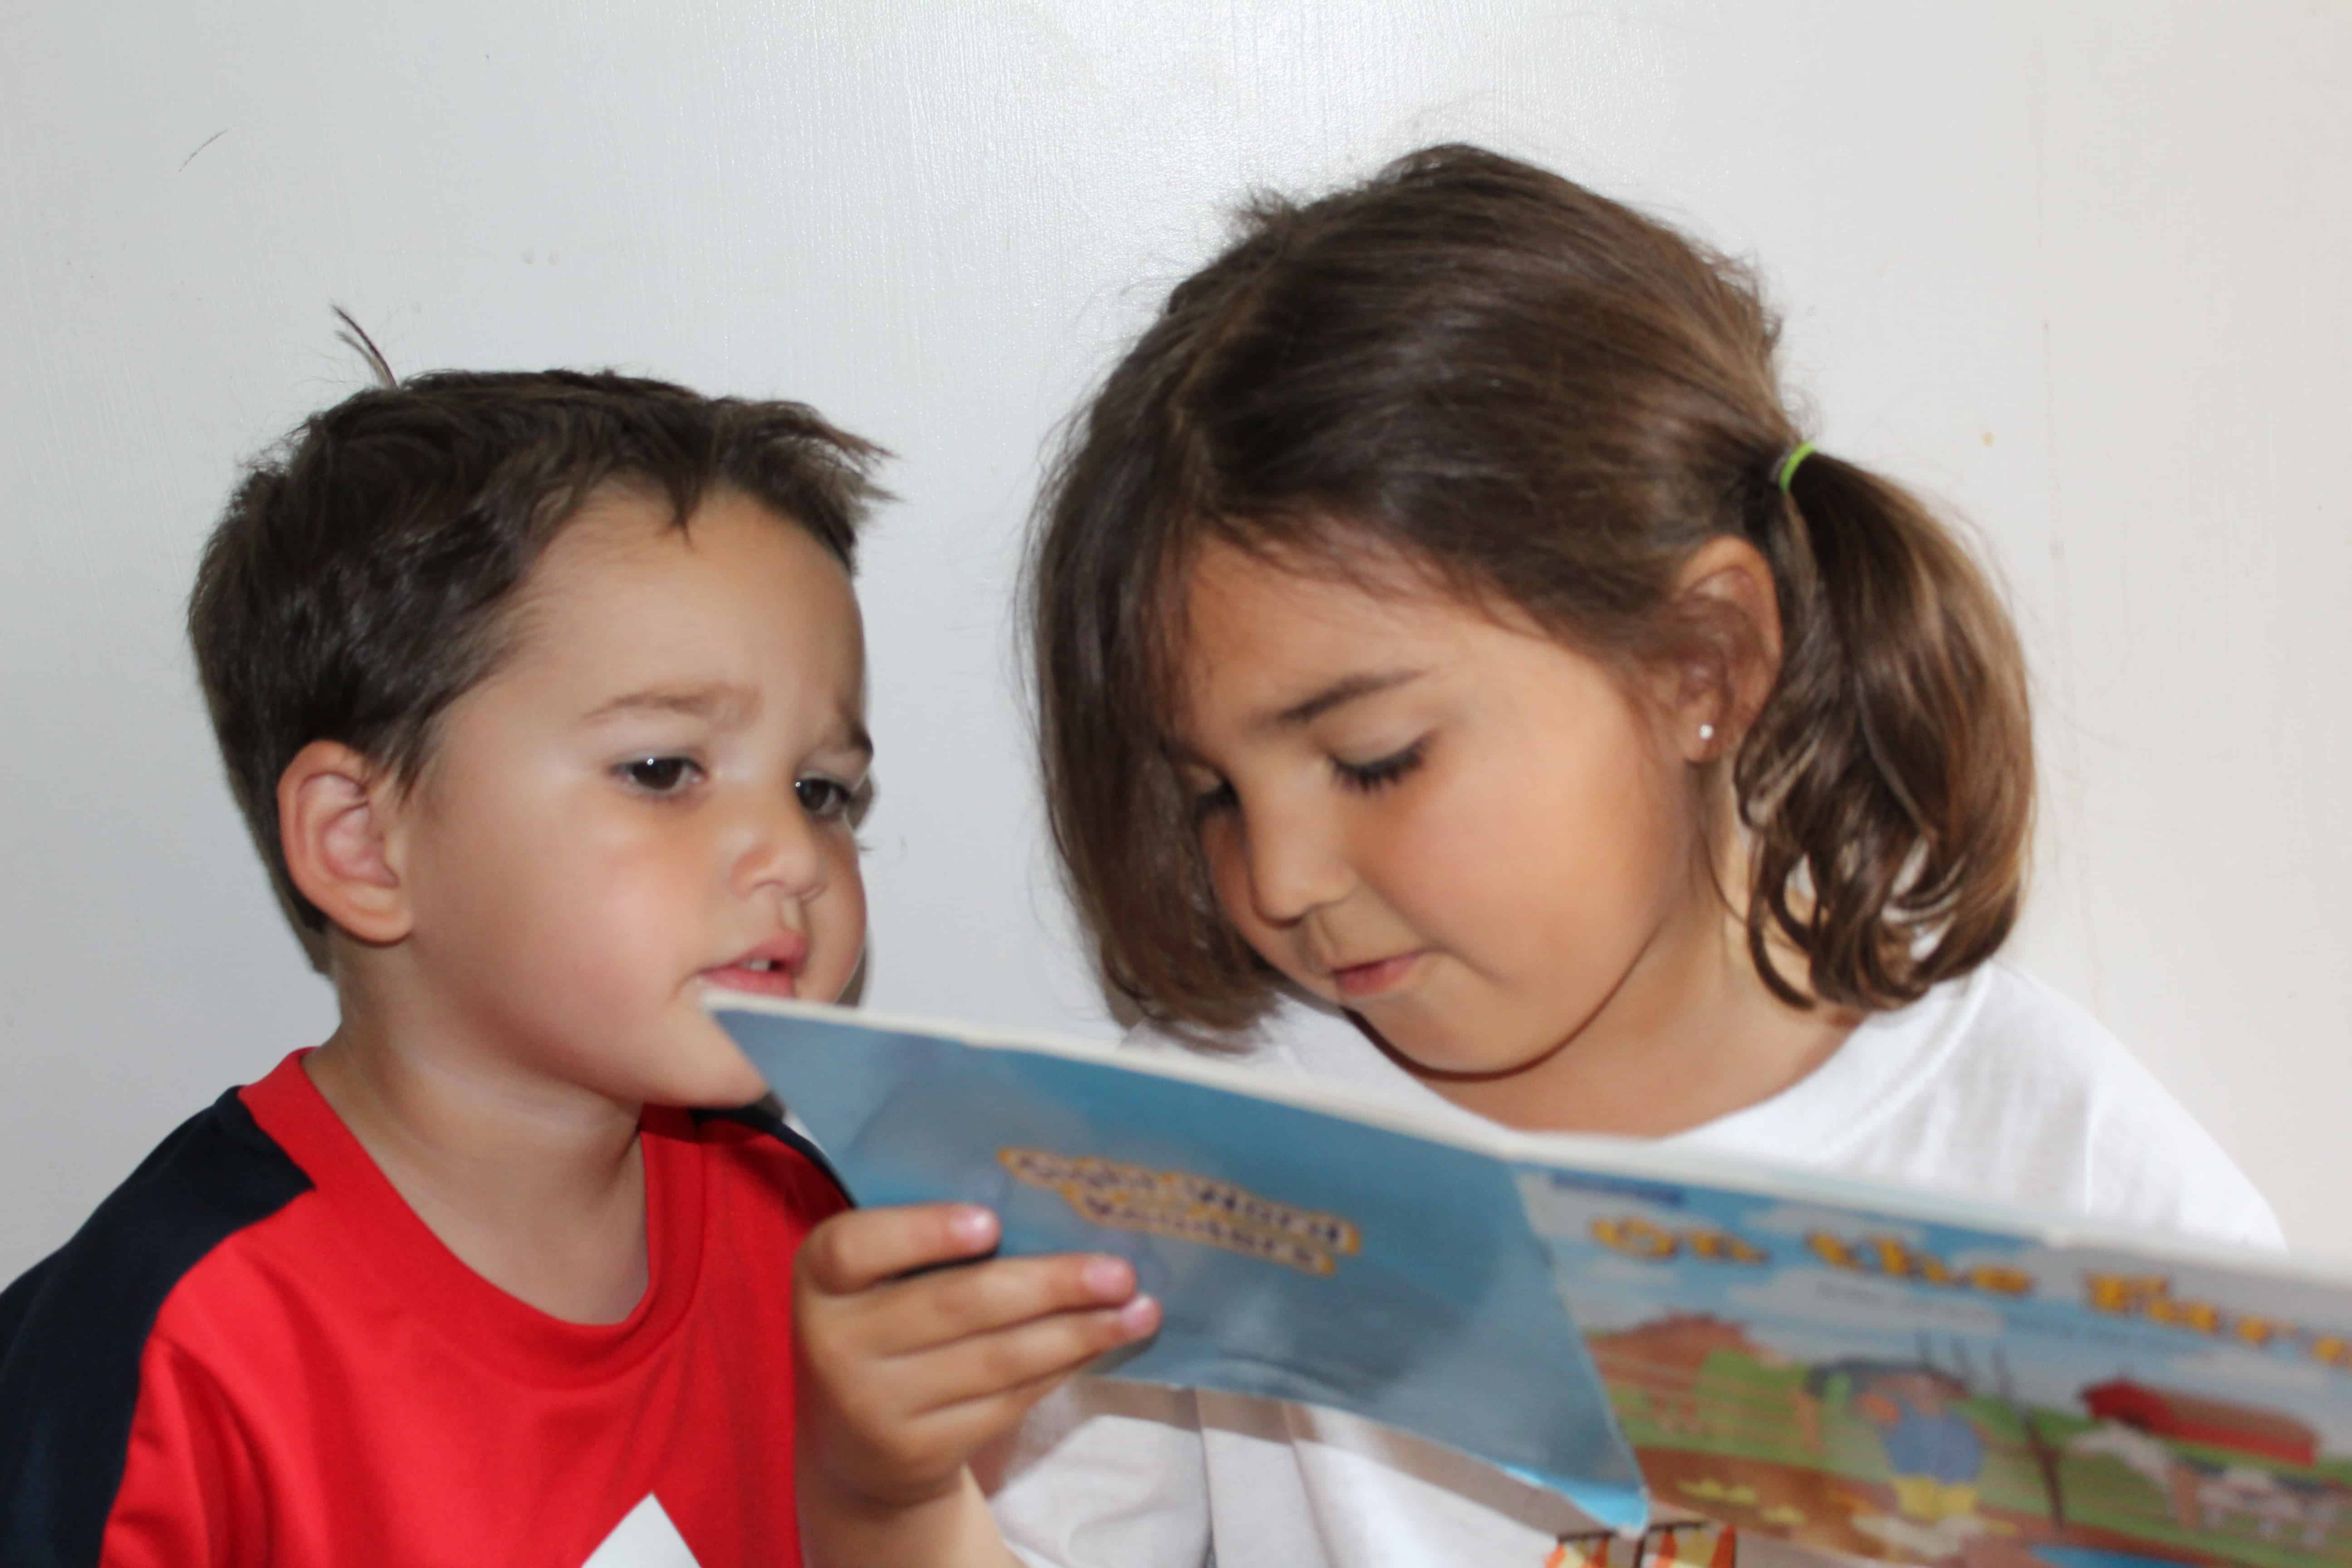 Keep their skills fresh this summer! Practice reading, math, and writing with these fun summer learning activiites at TheSaltyMamas.com. #summerlearningactivities #summerlearningloss #summerreading